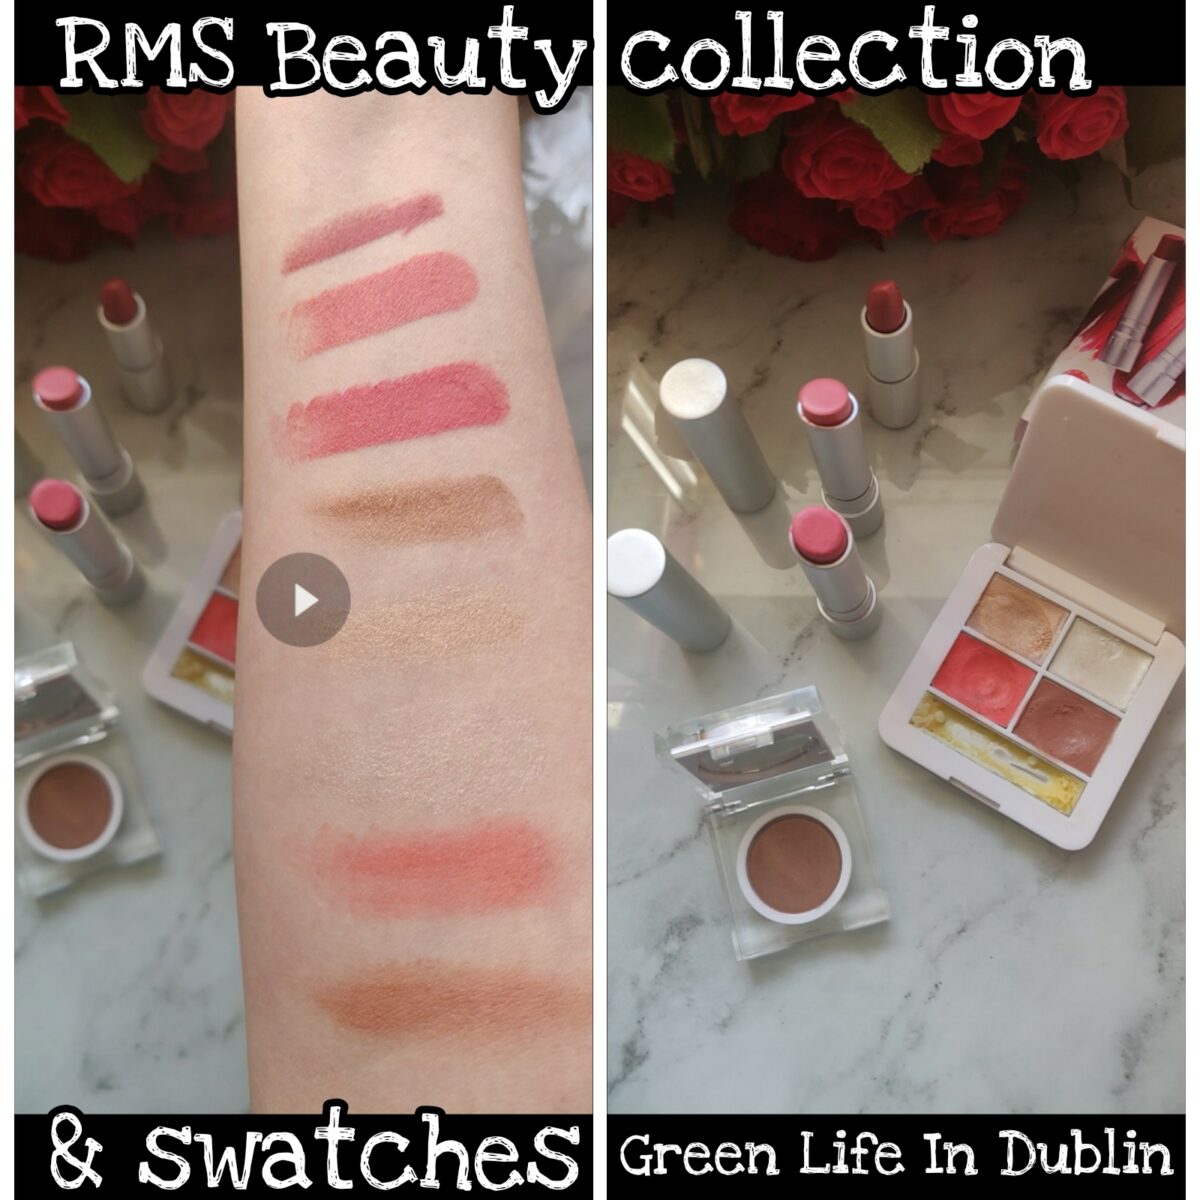 RMS Beauty collection and swatches – Green Life In Dublin